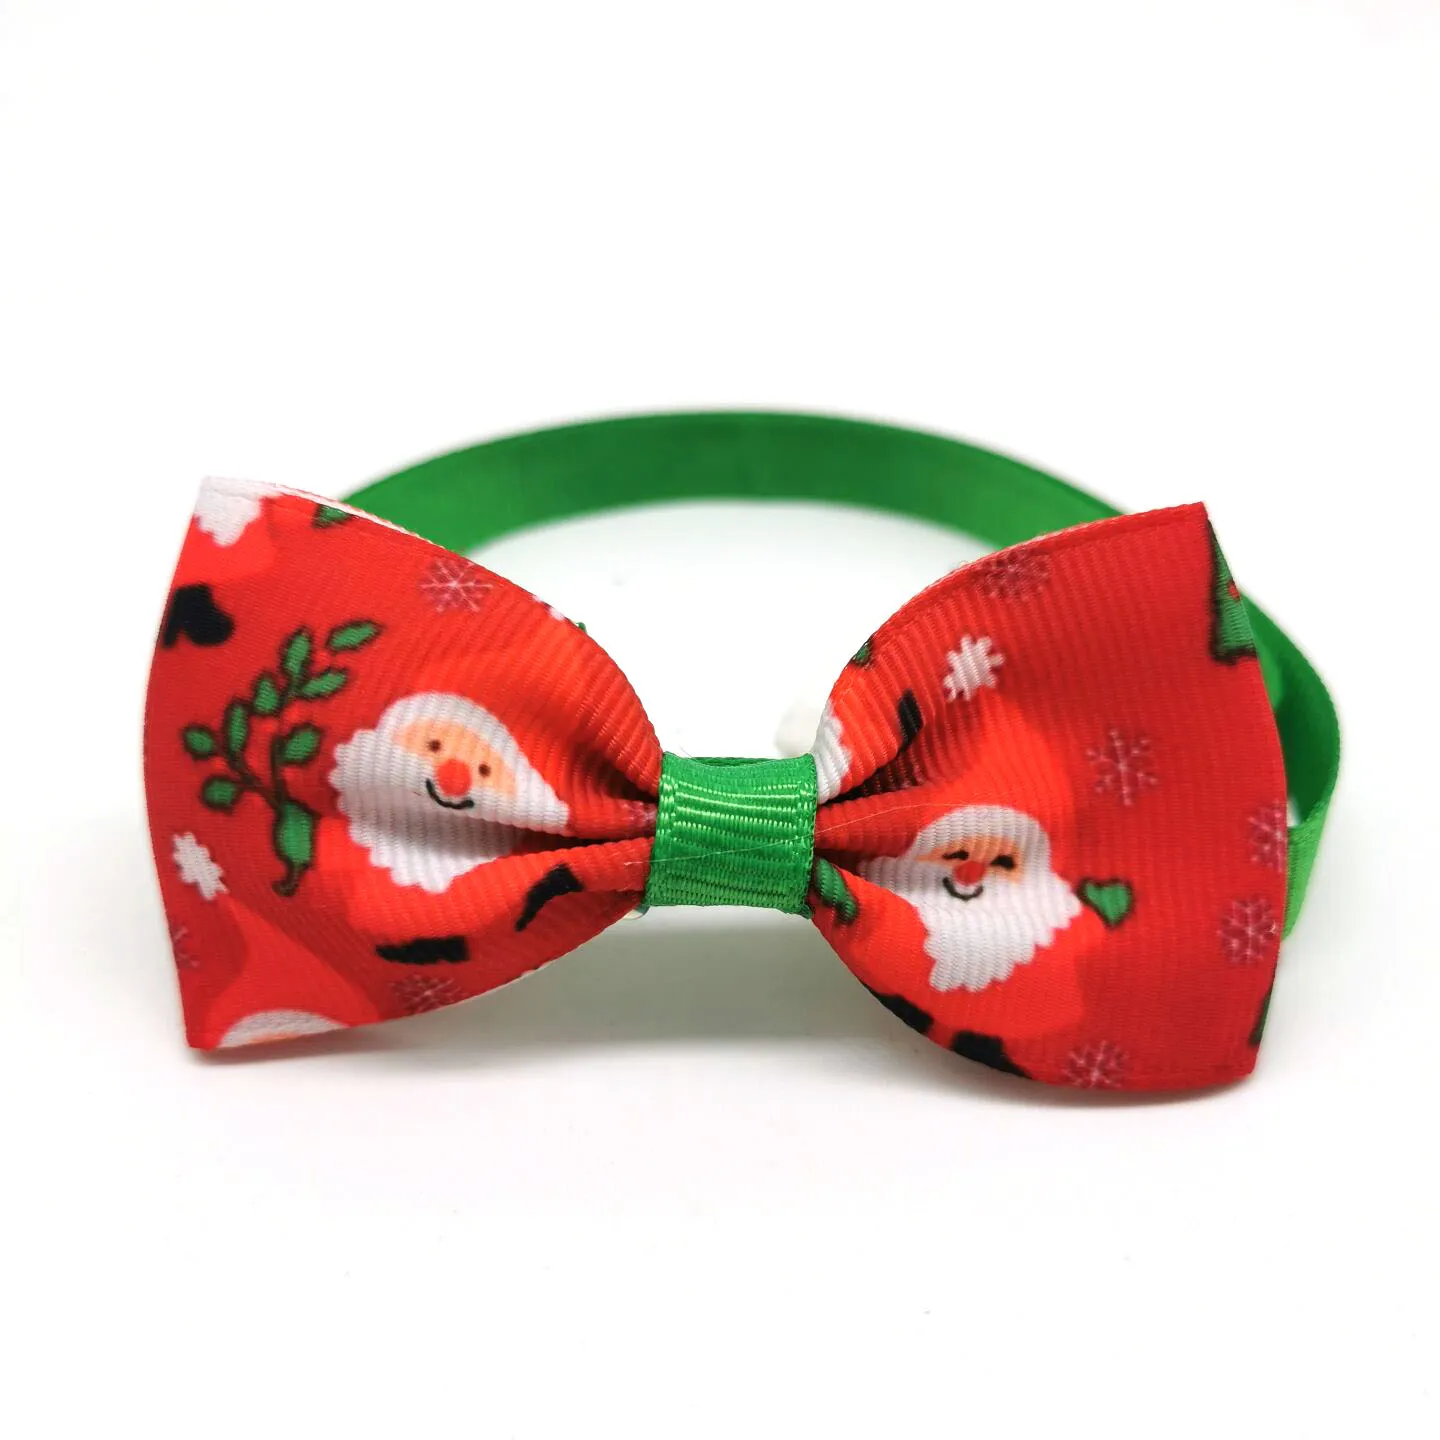 30/50st Pet Dog Christmas Bowties Accessories Snowman Bow Ties Jul Liten Middle Dog Ties Holiday Grooming Pet Supplies